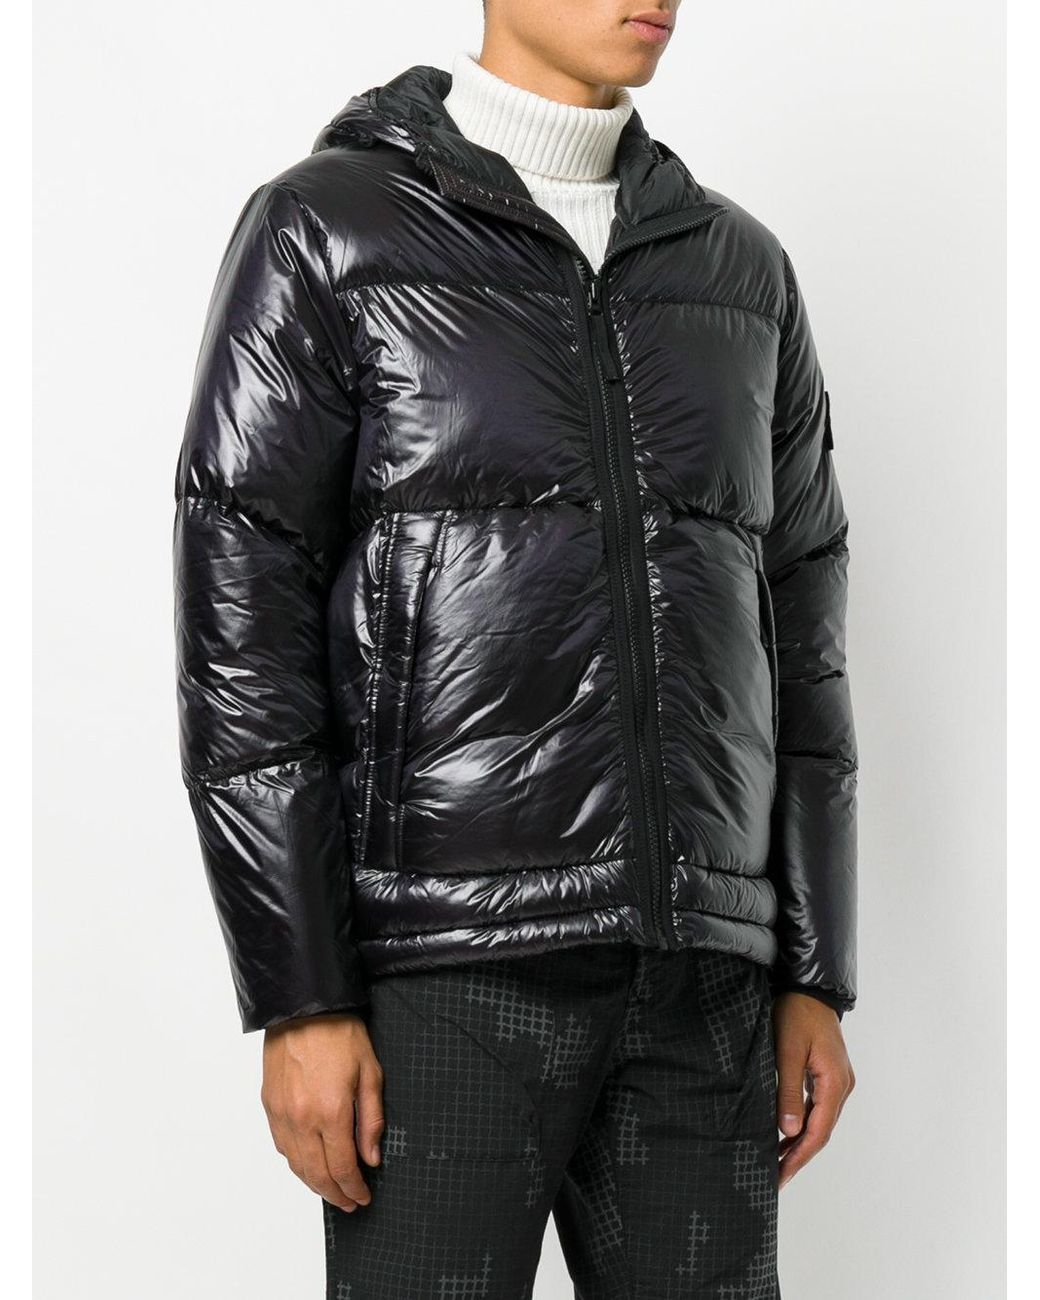 Stone Island Glossy Puffer Jacket in Black for Men | Lyst